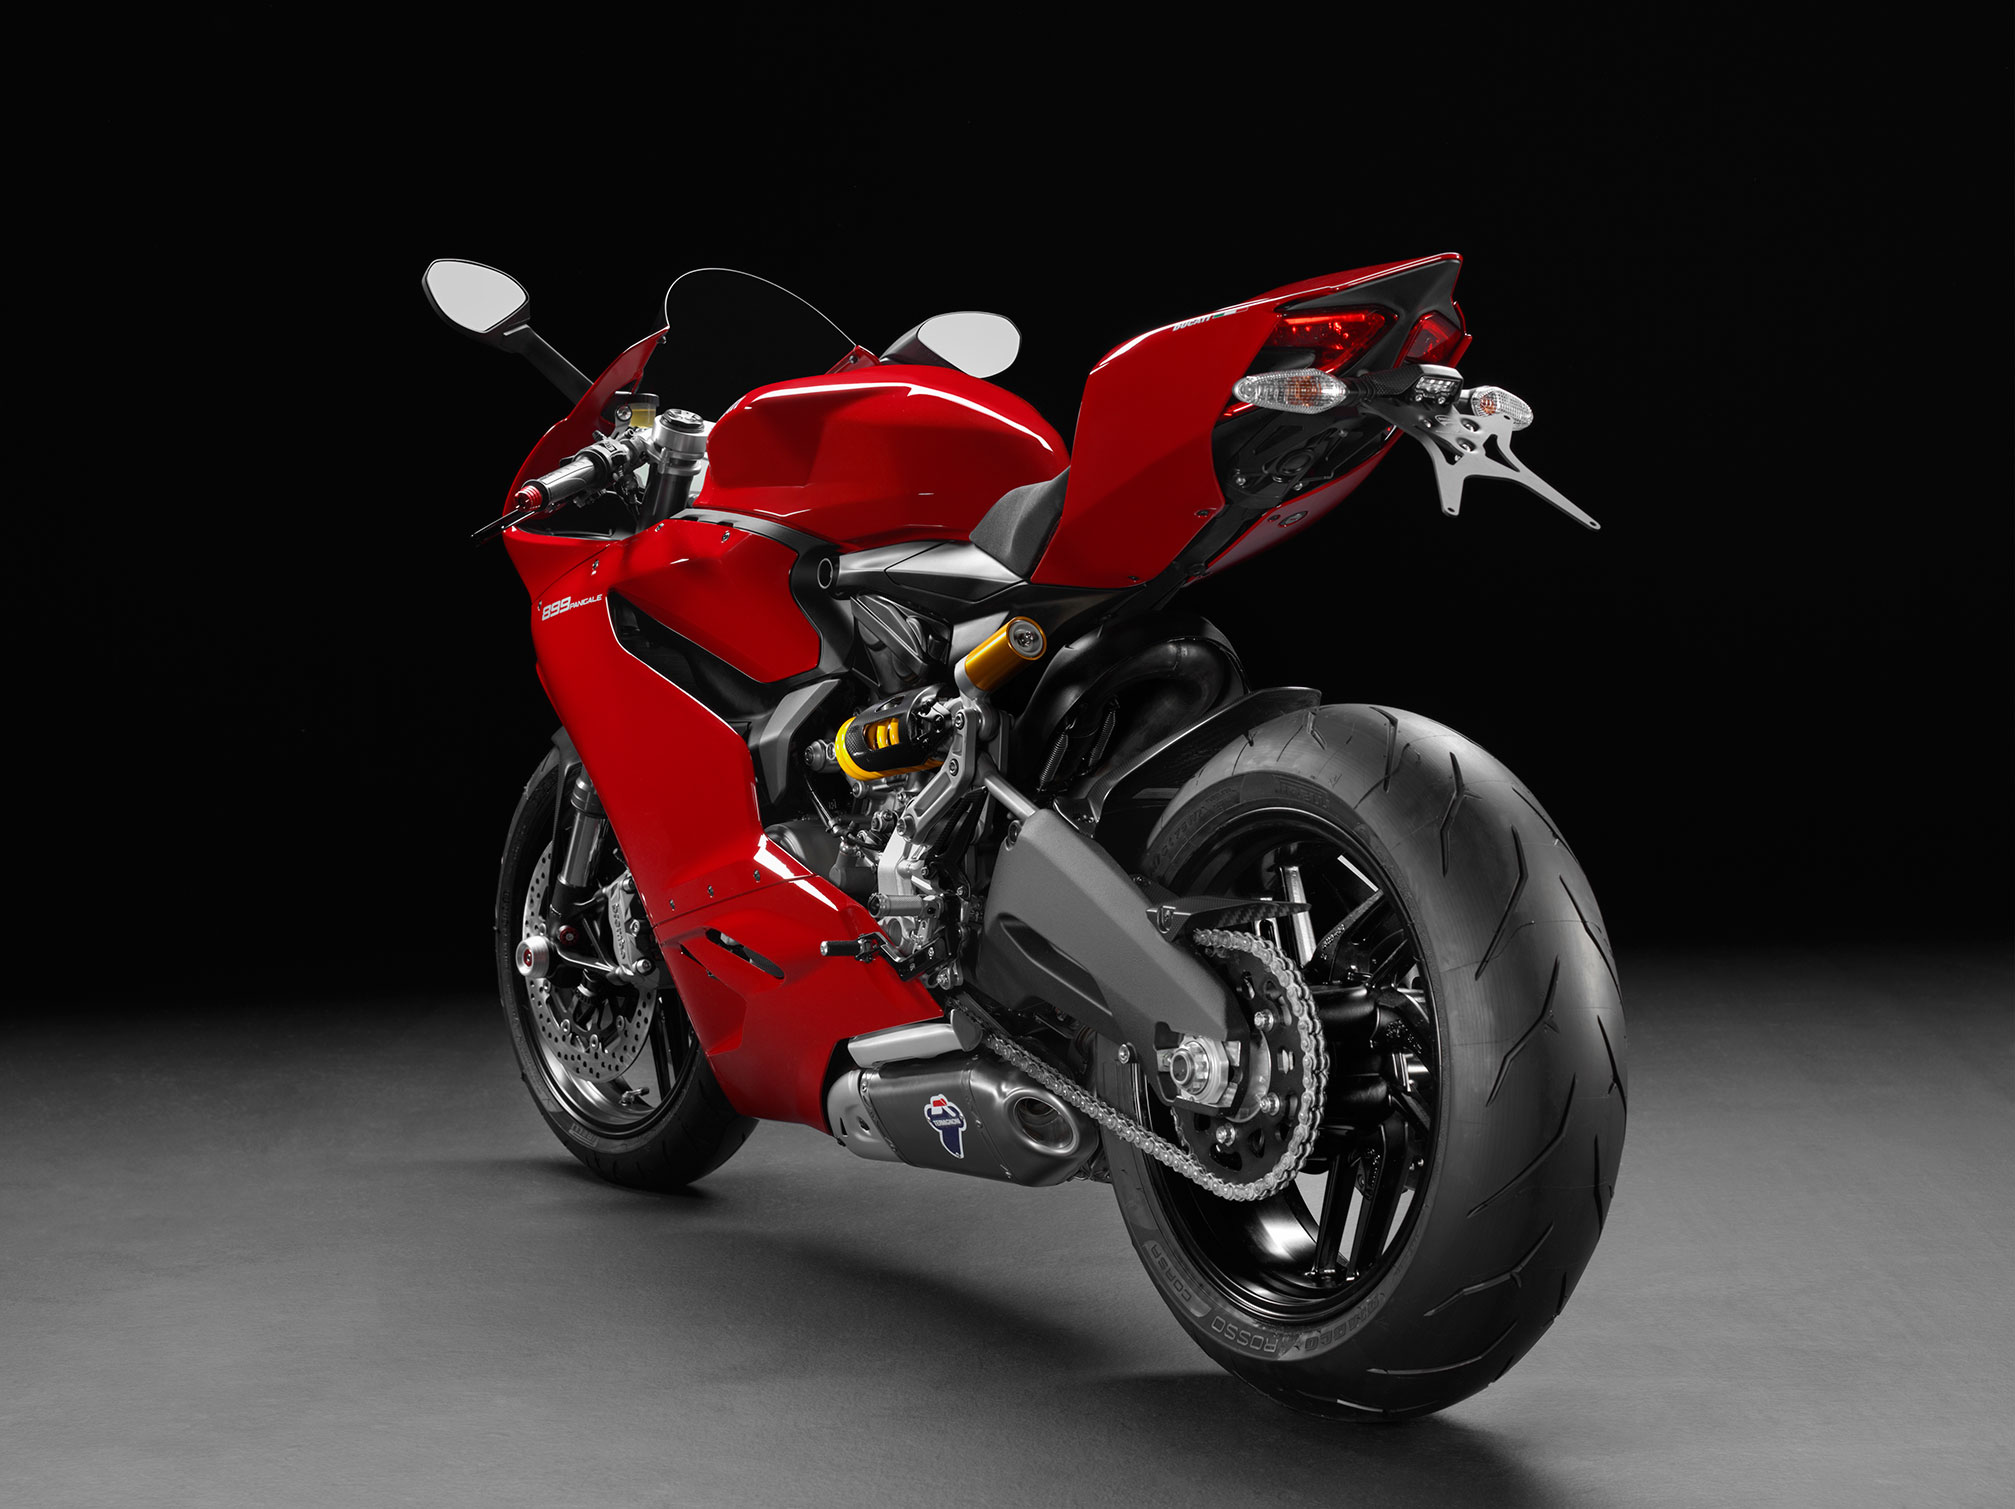 2015 Ducati Superbike 899 Panigale Review